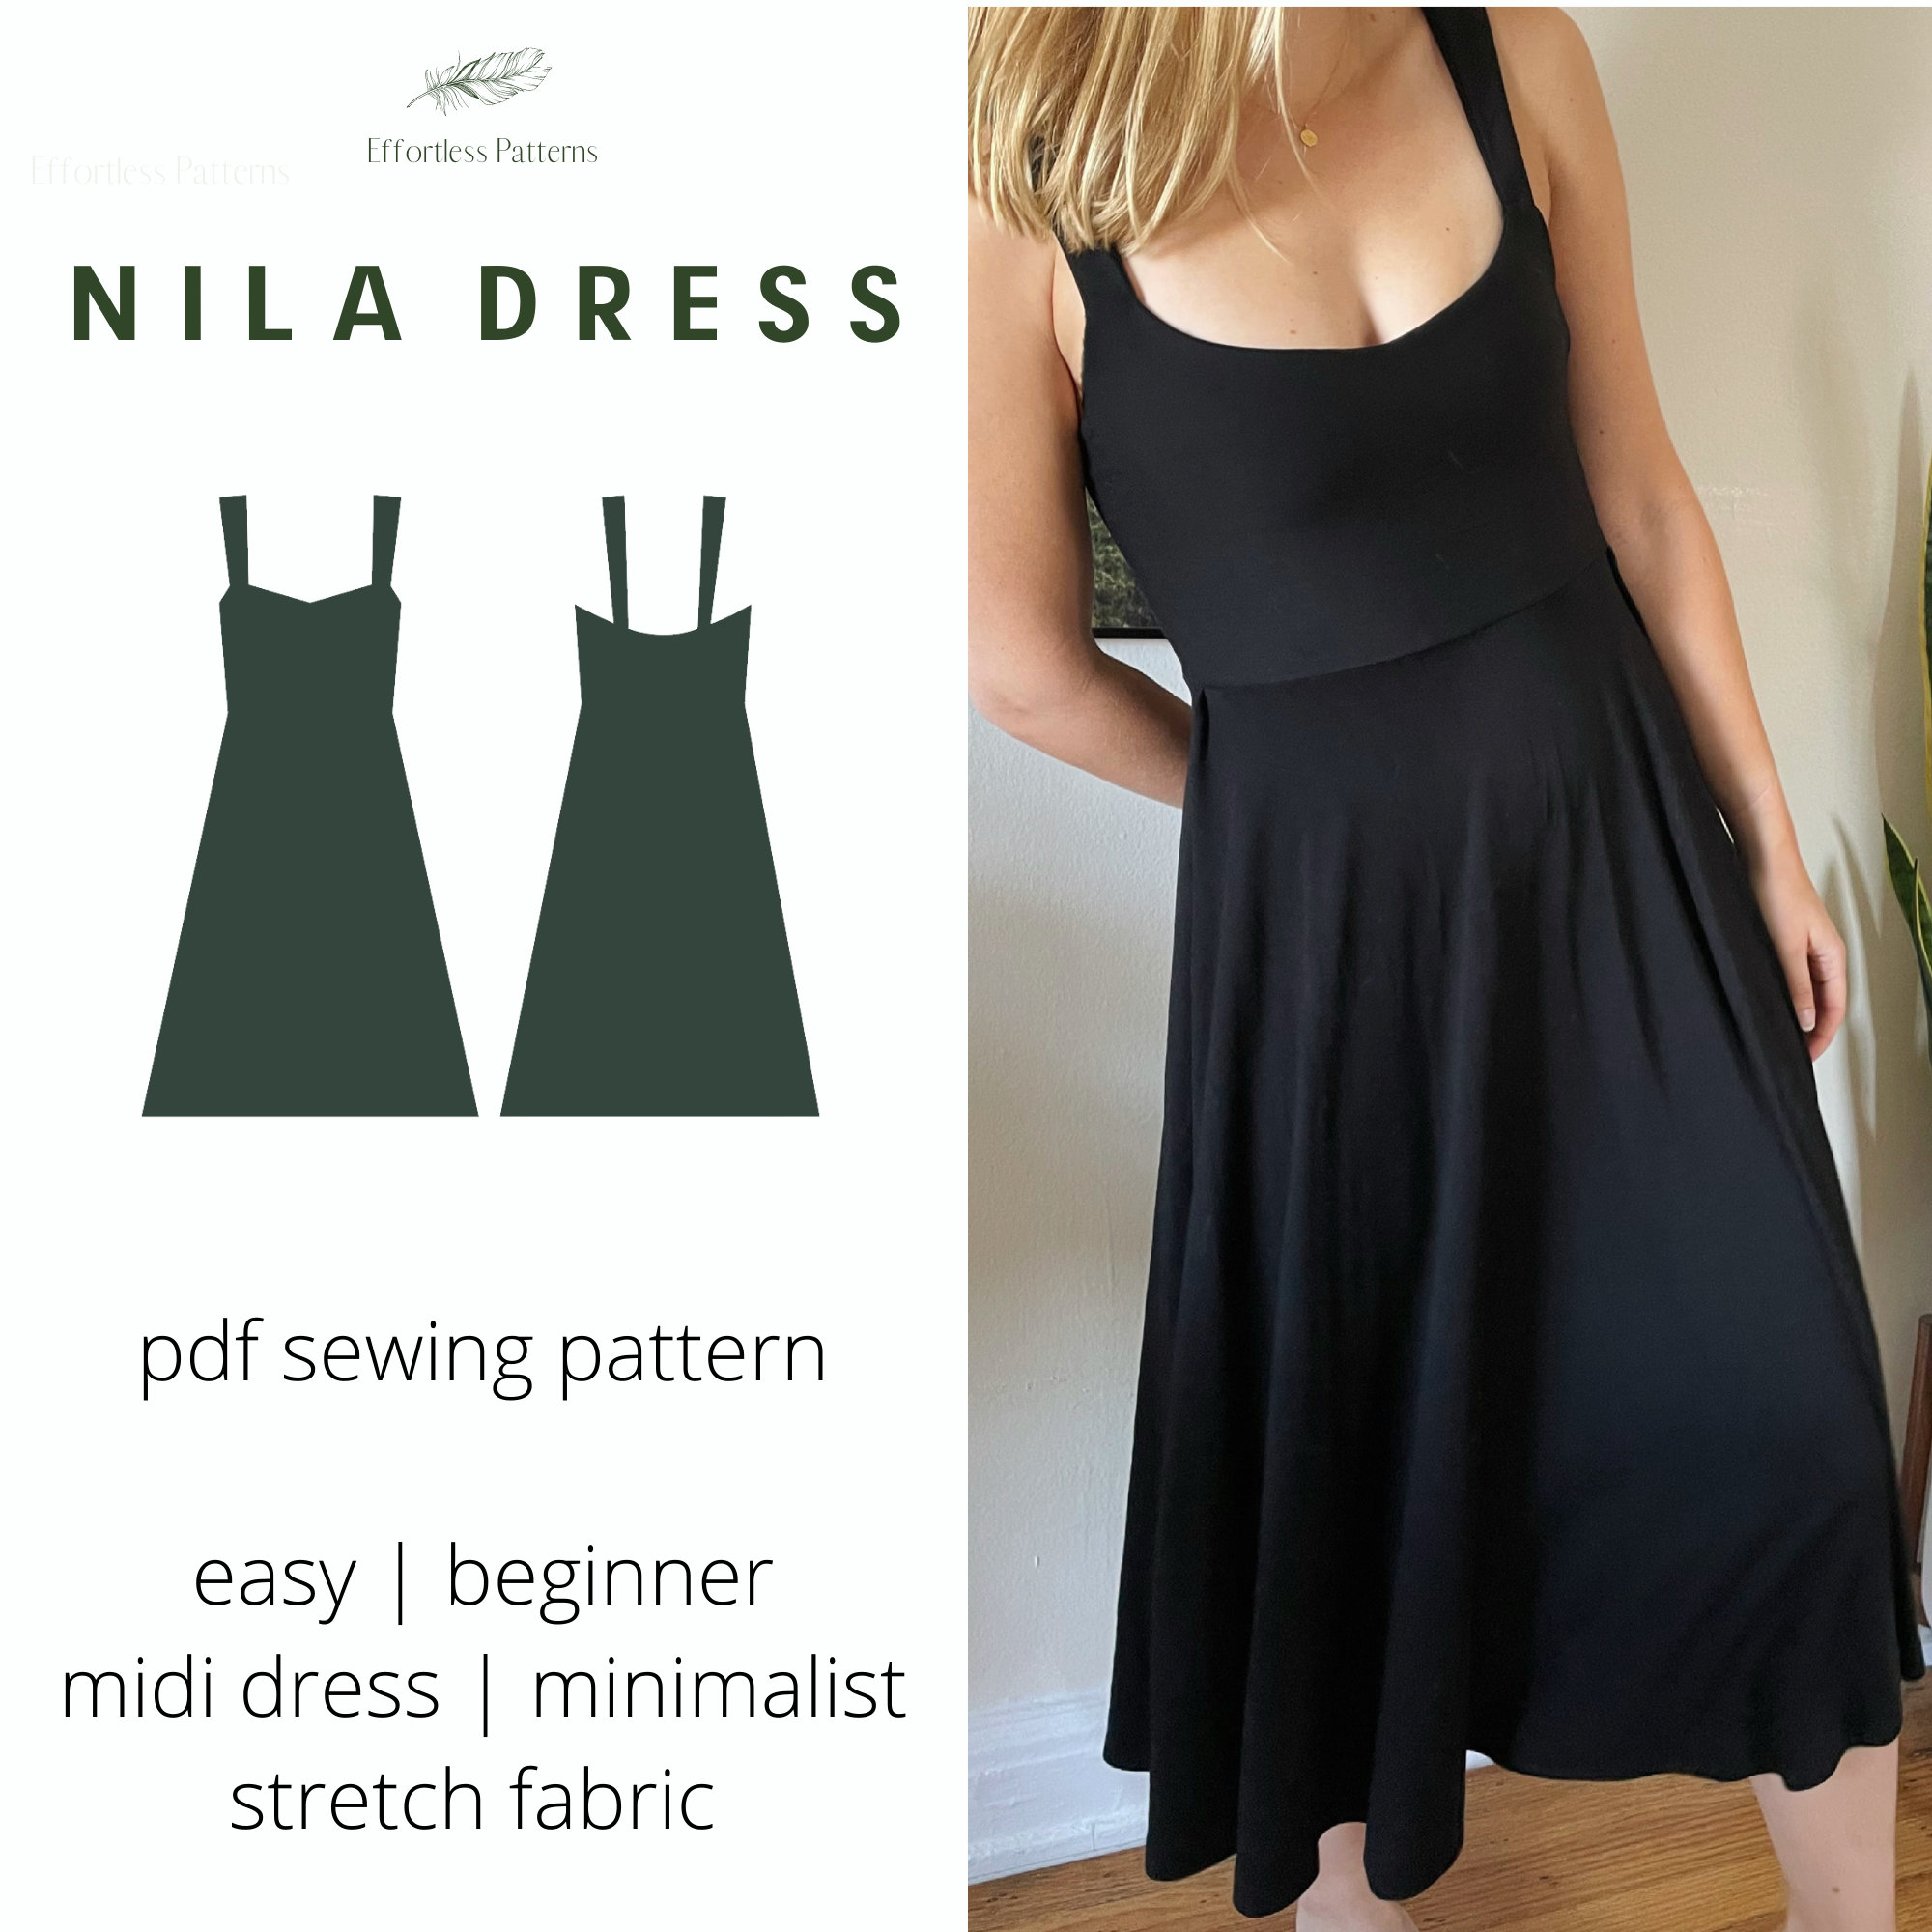 How to draft a pattern for a simple dress with your own measurements